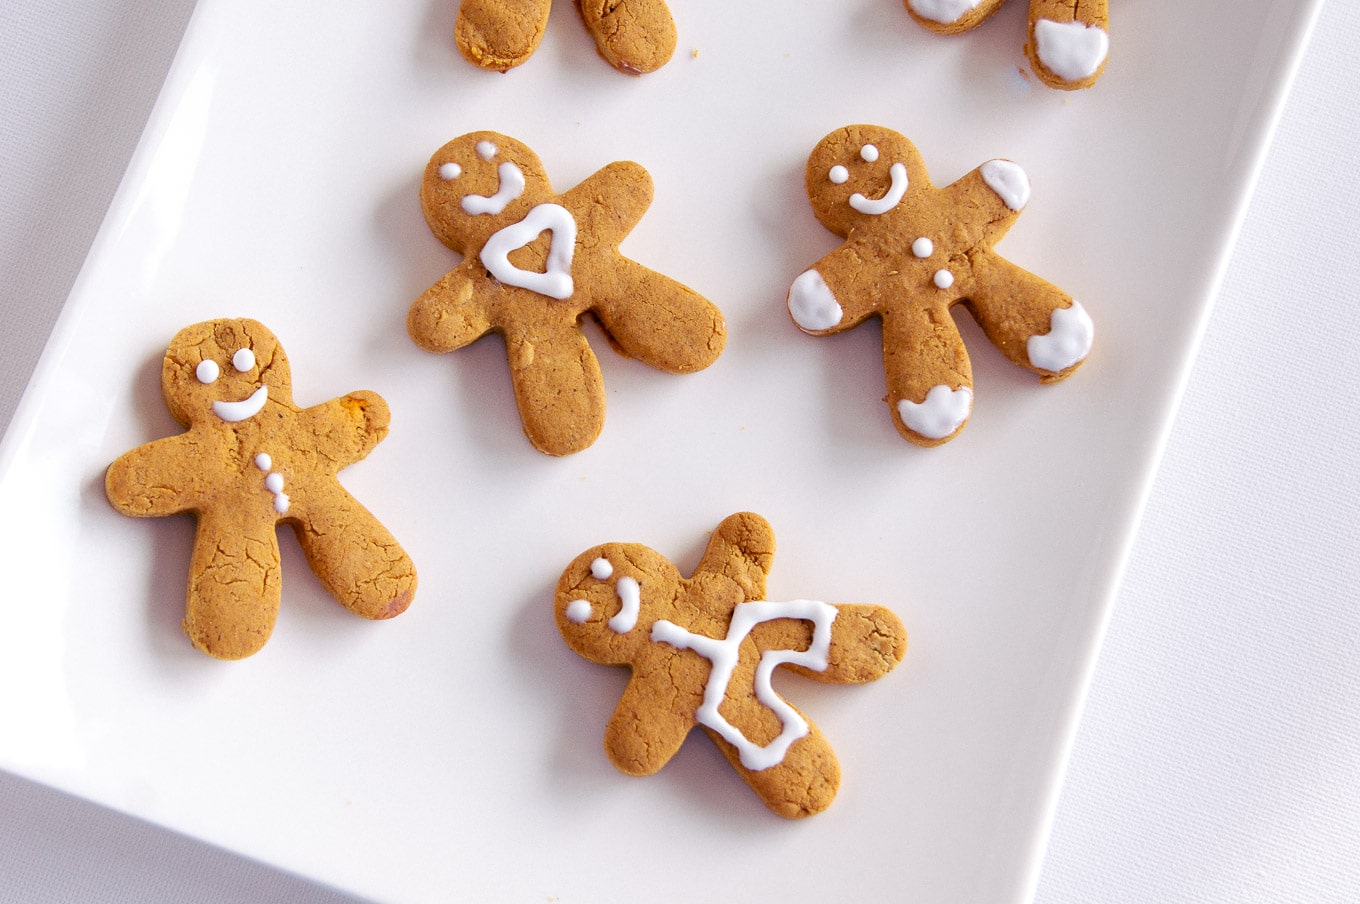 A top-down photo of various gingerbread cookies for Christmas. Each gingerbread man has a different design and facial expression.